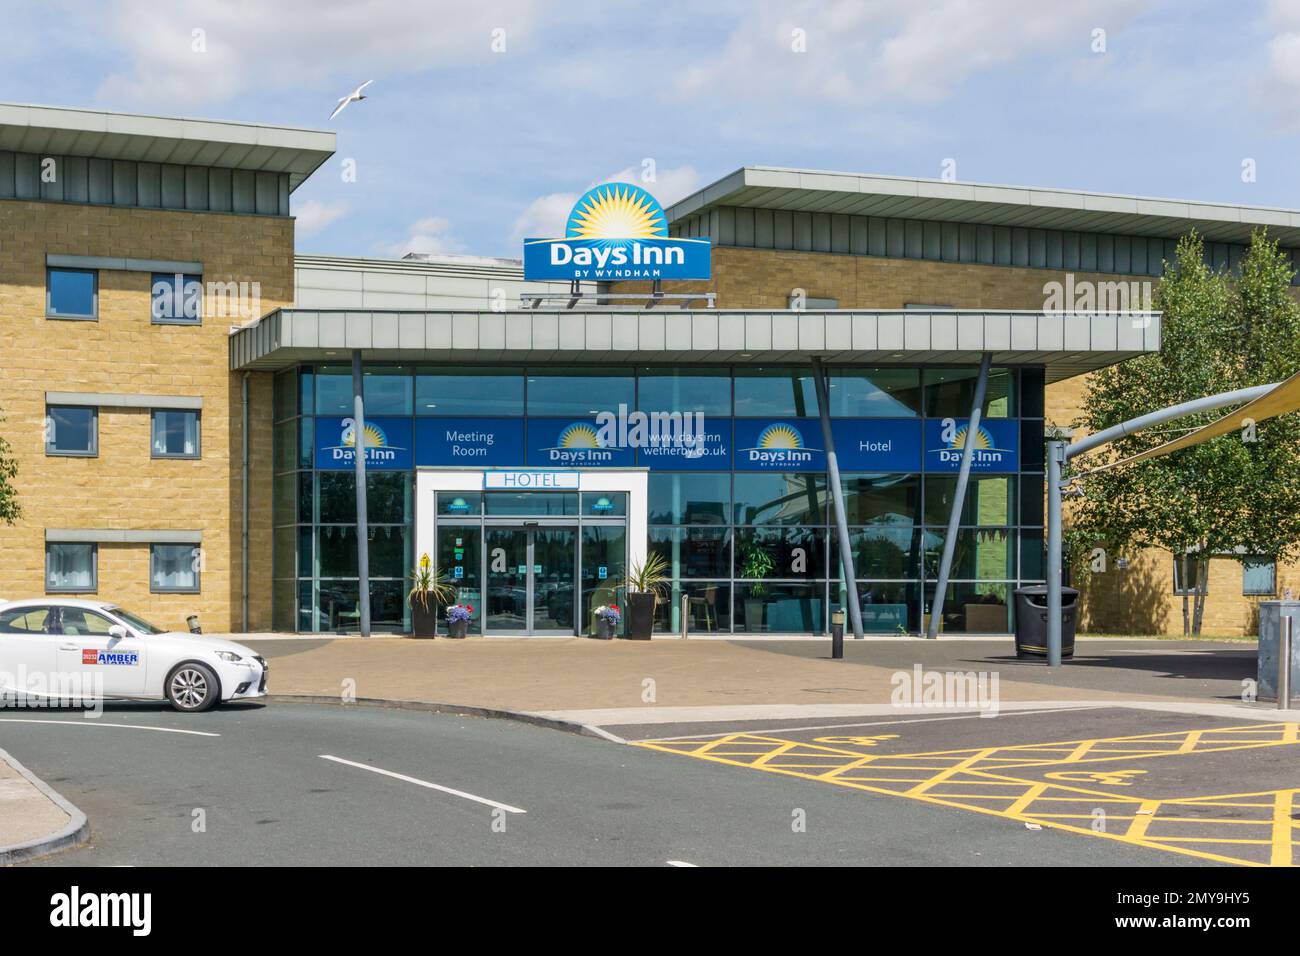 Days Inn Hotel at Wetherby service station on A1(M) motorway. Stock Photo